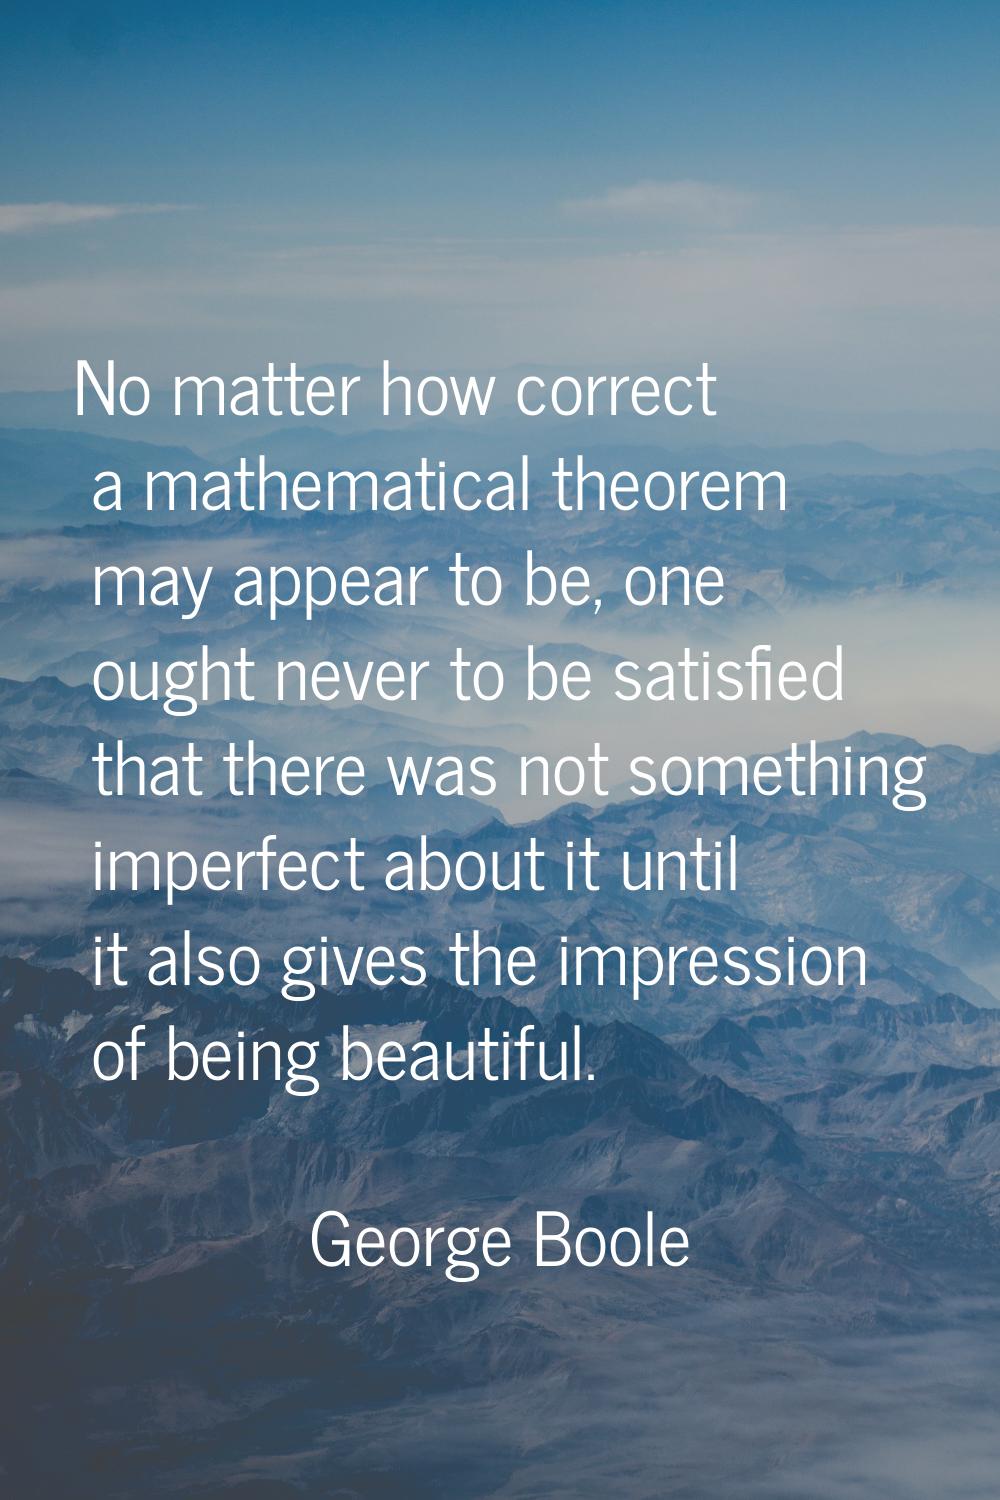 No matter how correct a mathematical theorem may appear to be, one ought never to be satisfied that